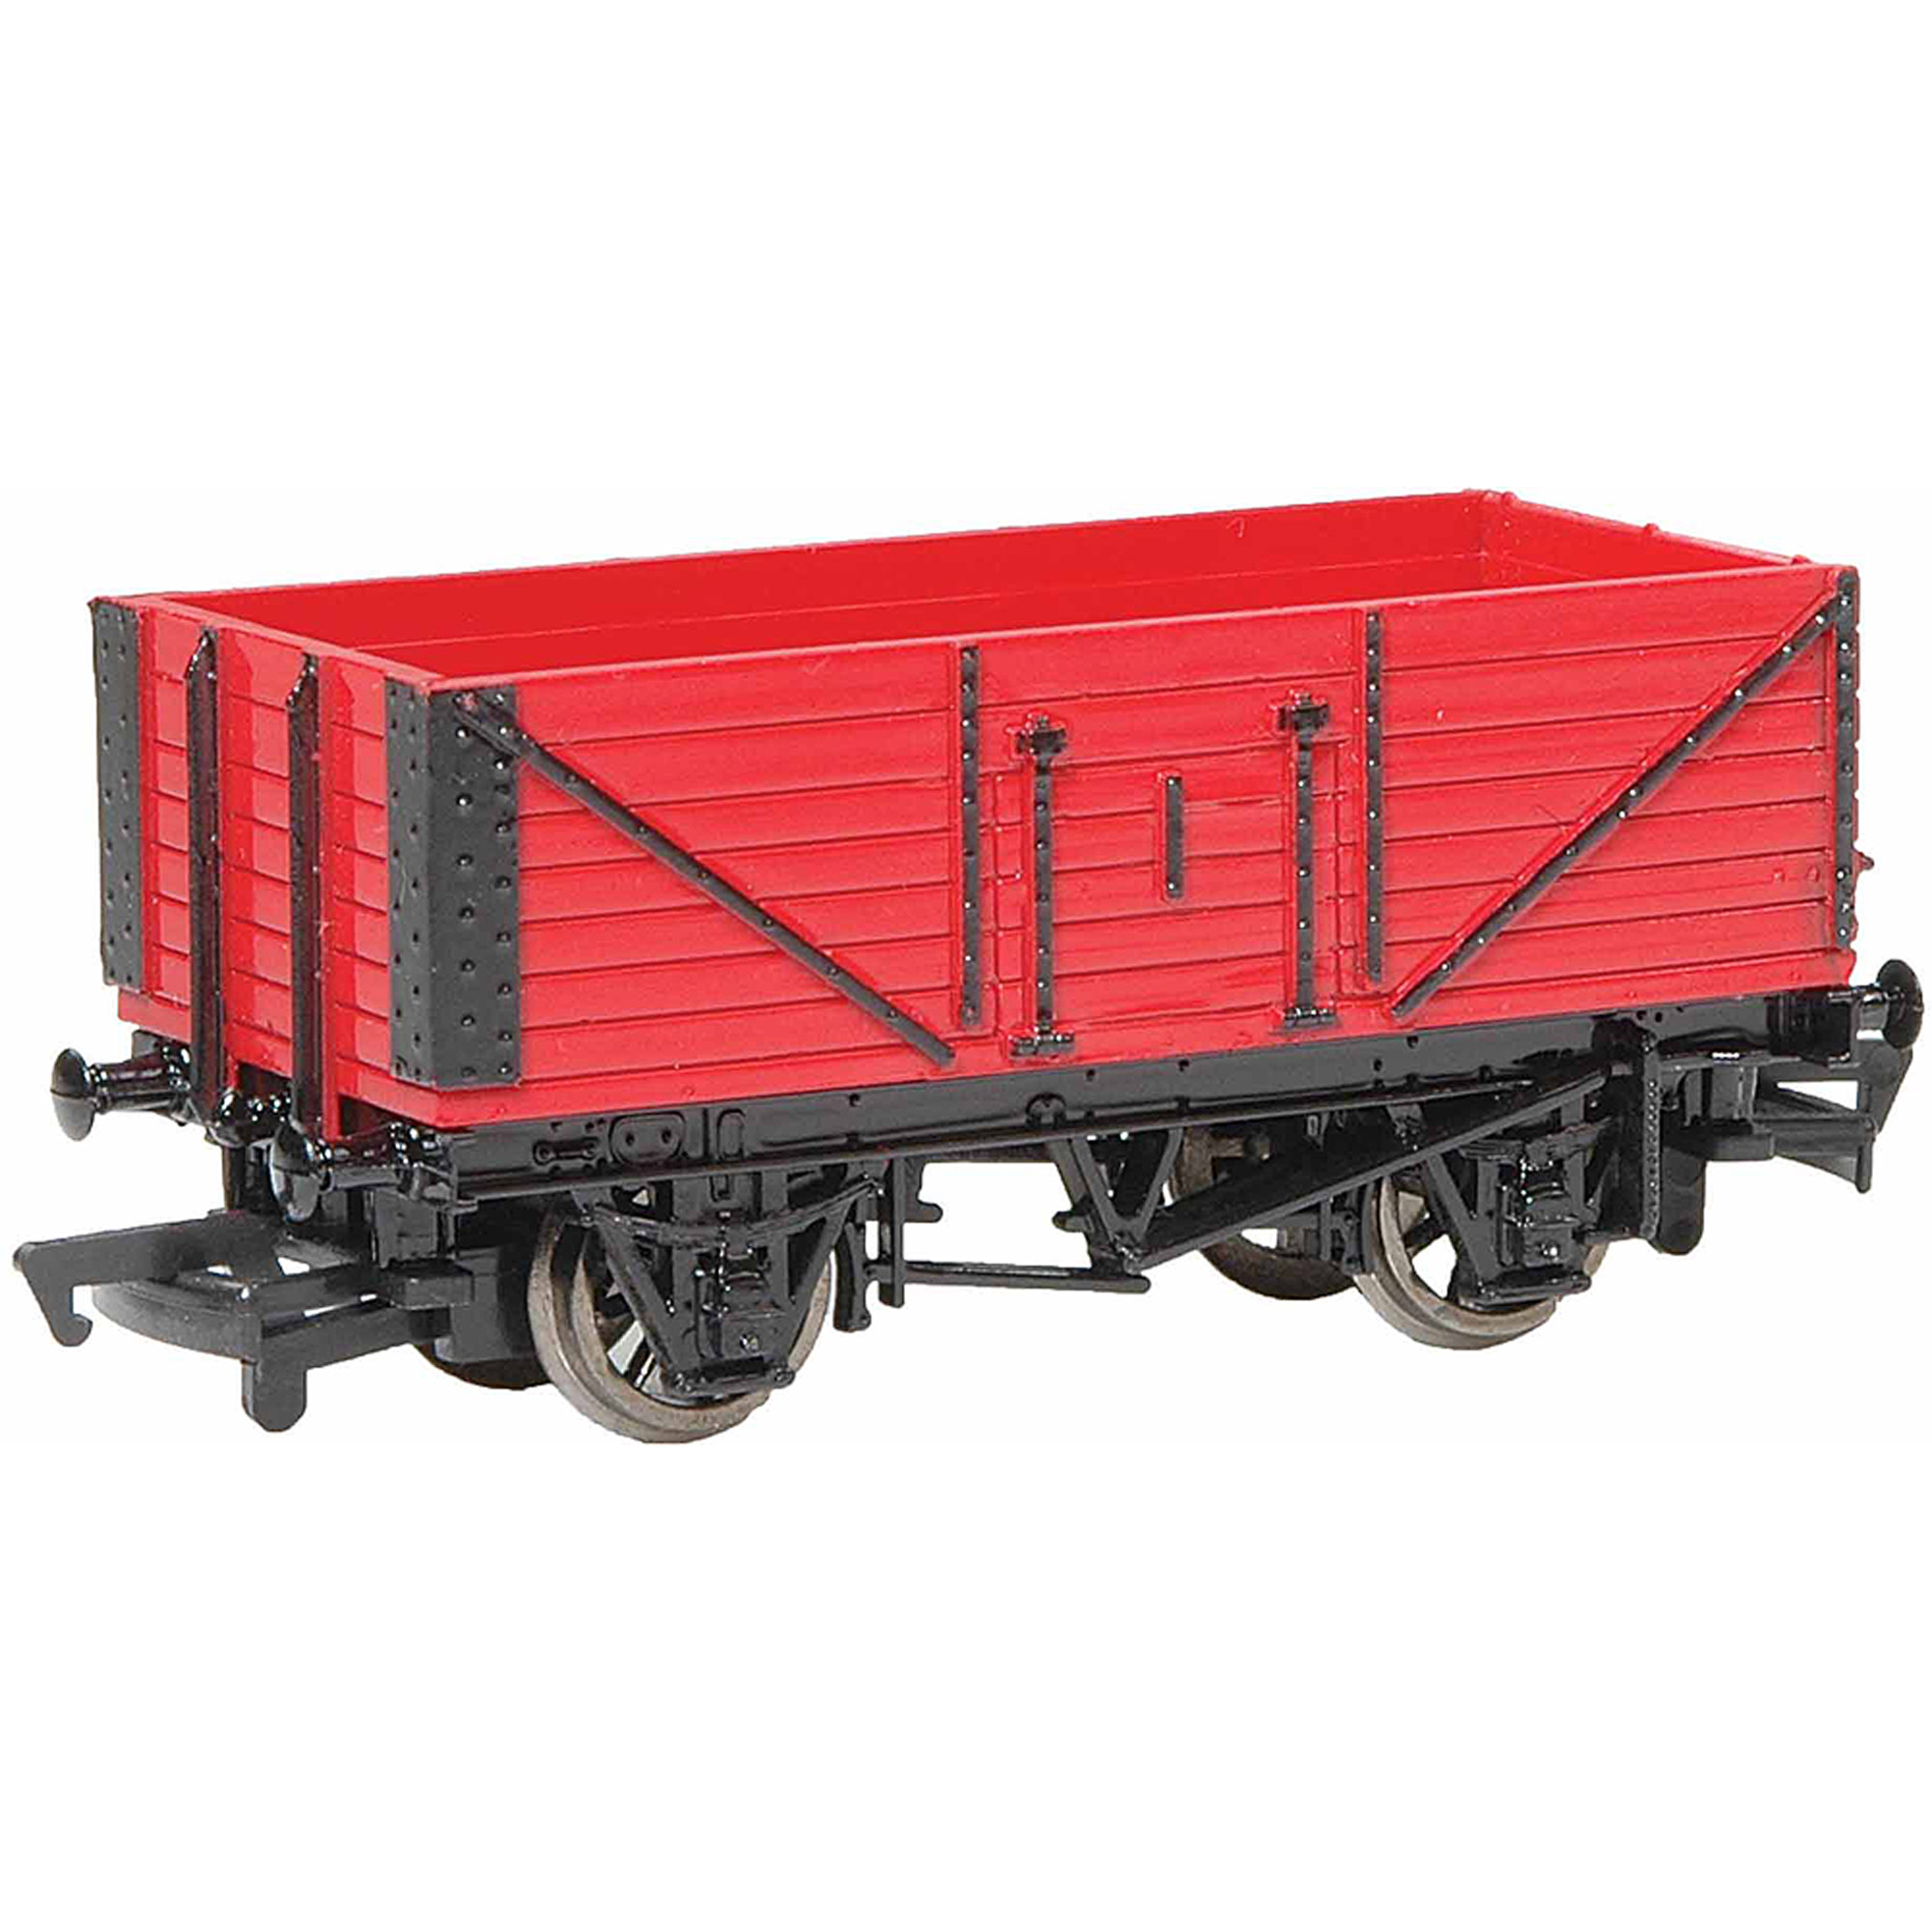 Bachmann Trains HO Scale Thomas & Friends Open Wagon - Red Train - image 1 of 2